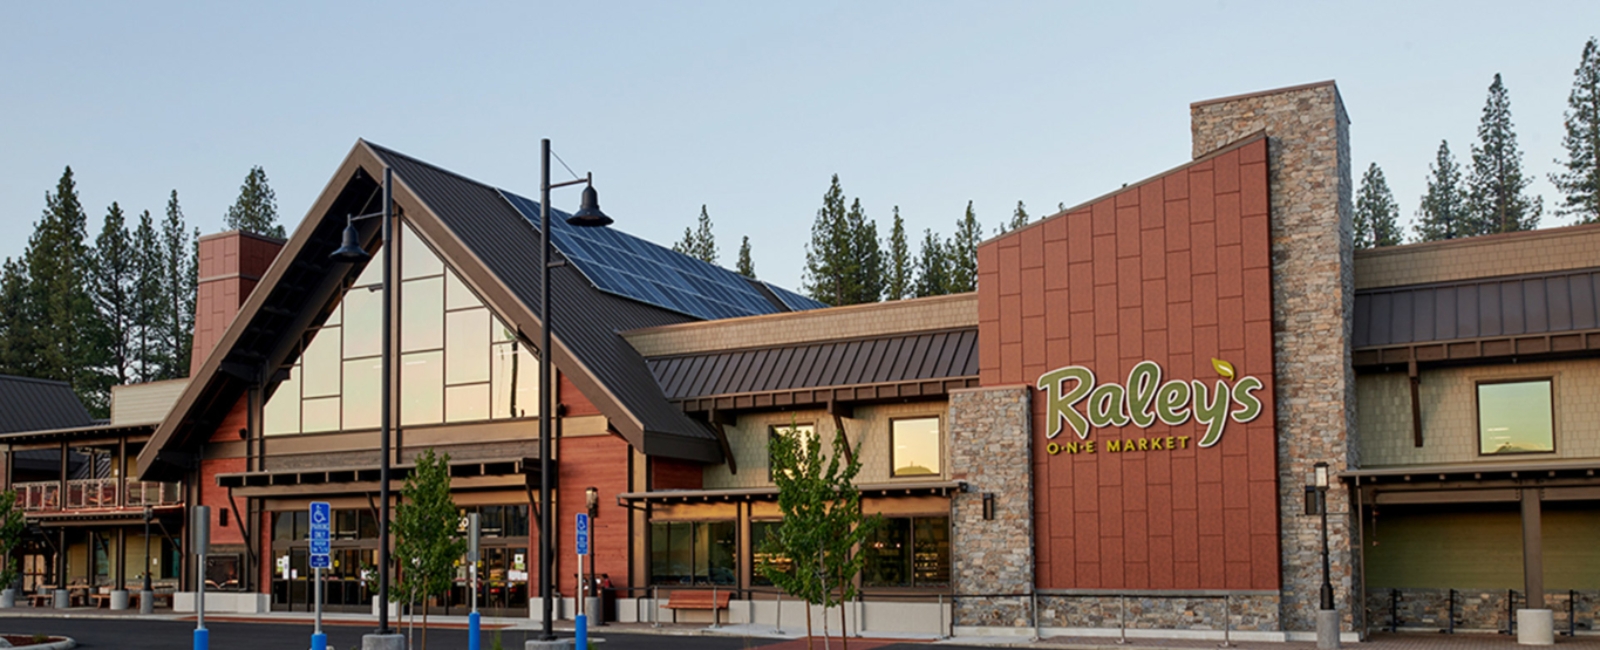 Raley’s O-N-E Market Offers Organics, Nutrition and Education to Truckee Community